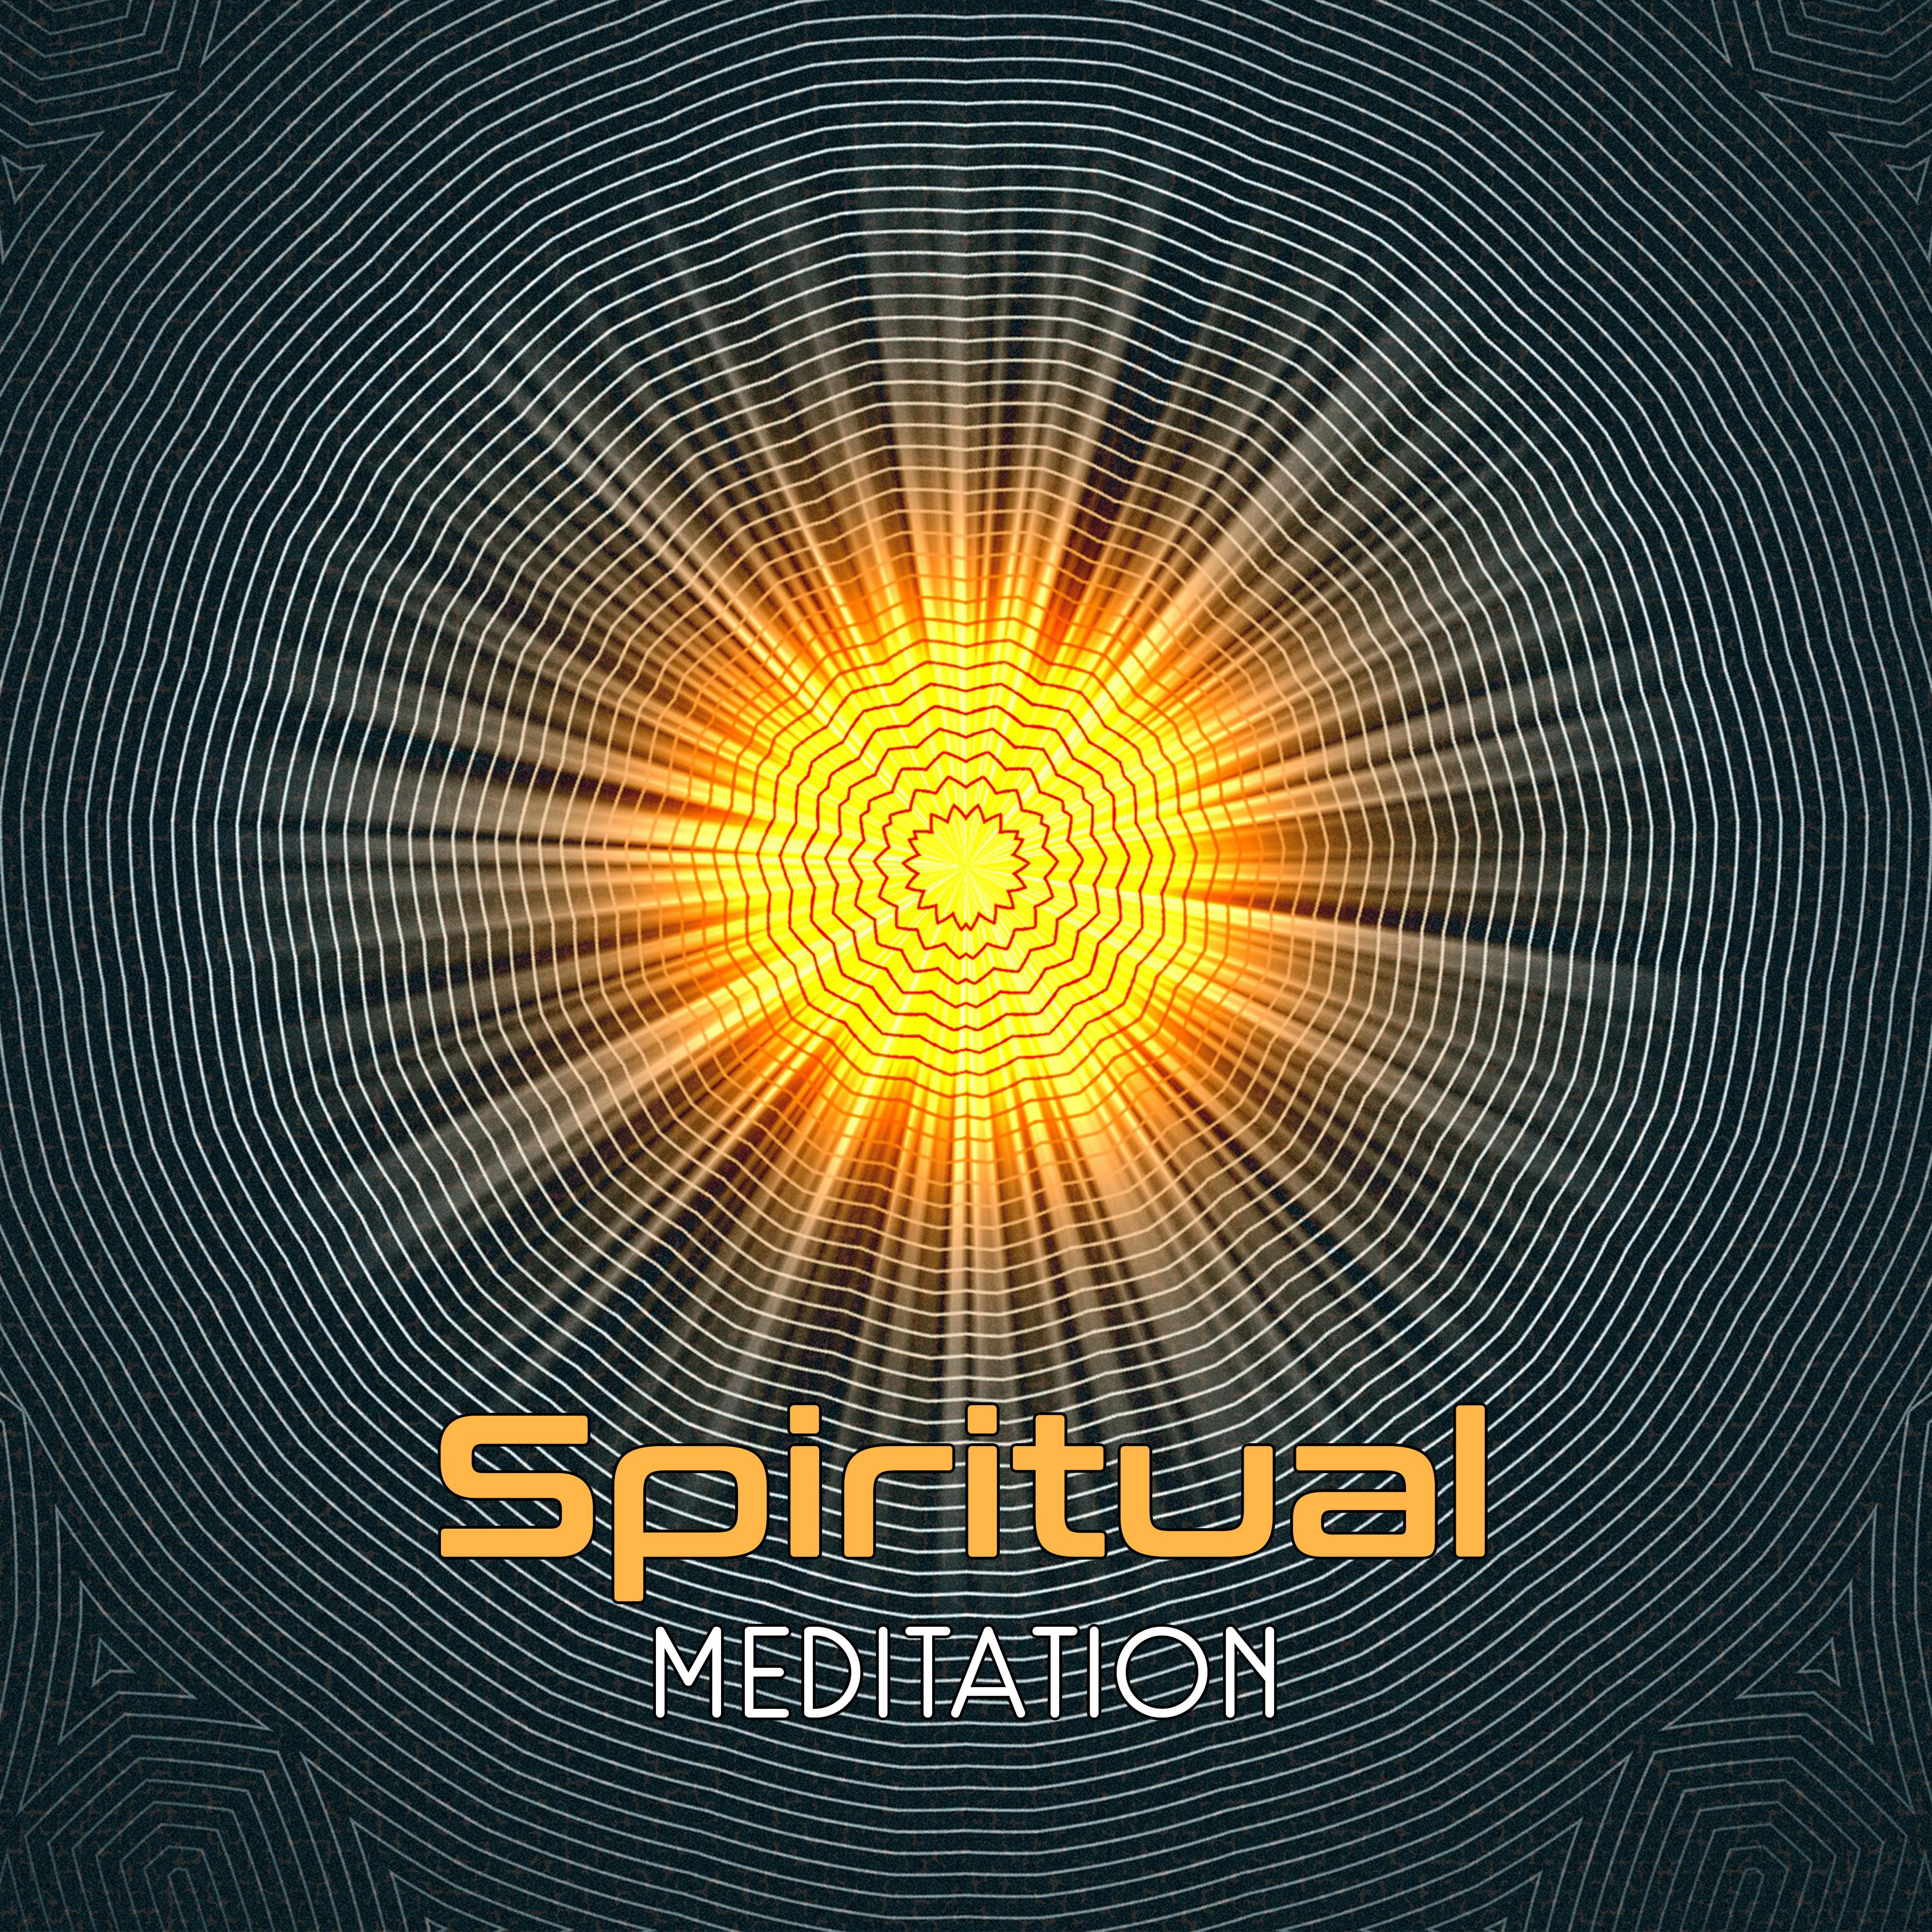 Spiritual Meditation  Spirit Free, Inner Relaxation, No More Stress, Chilled New Age